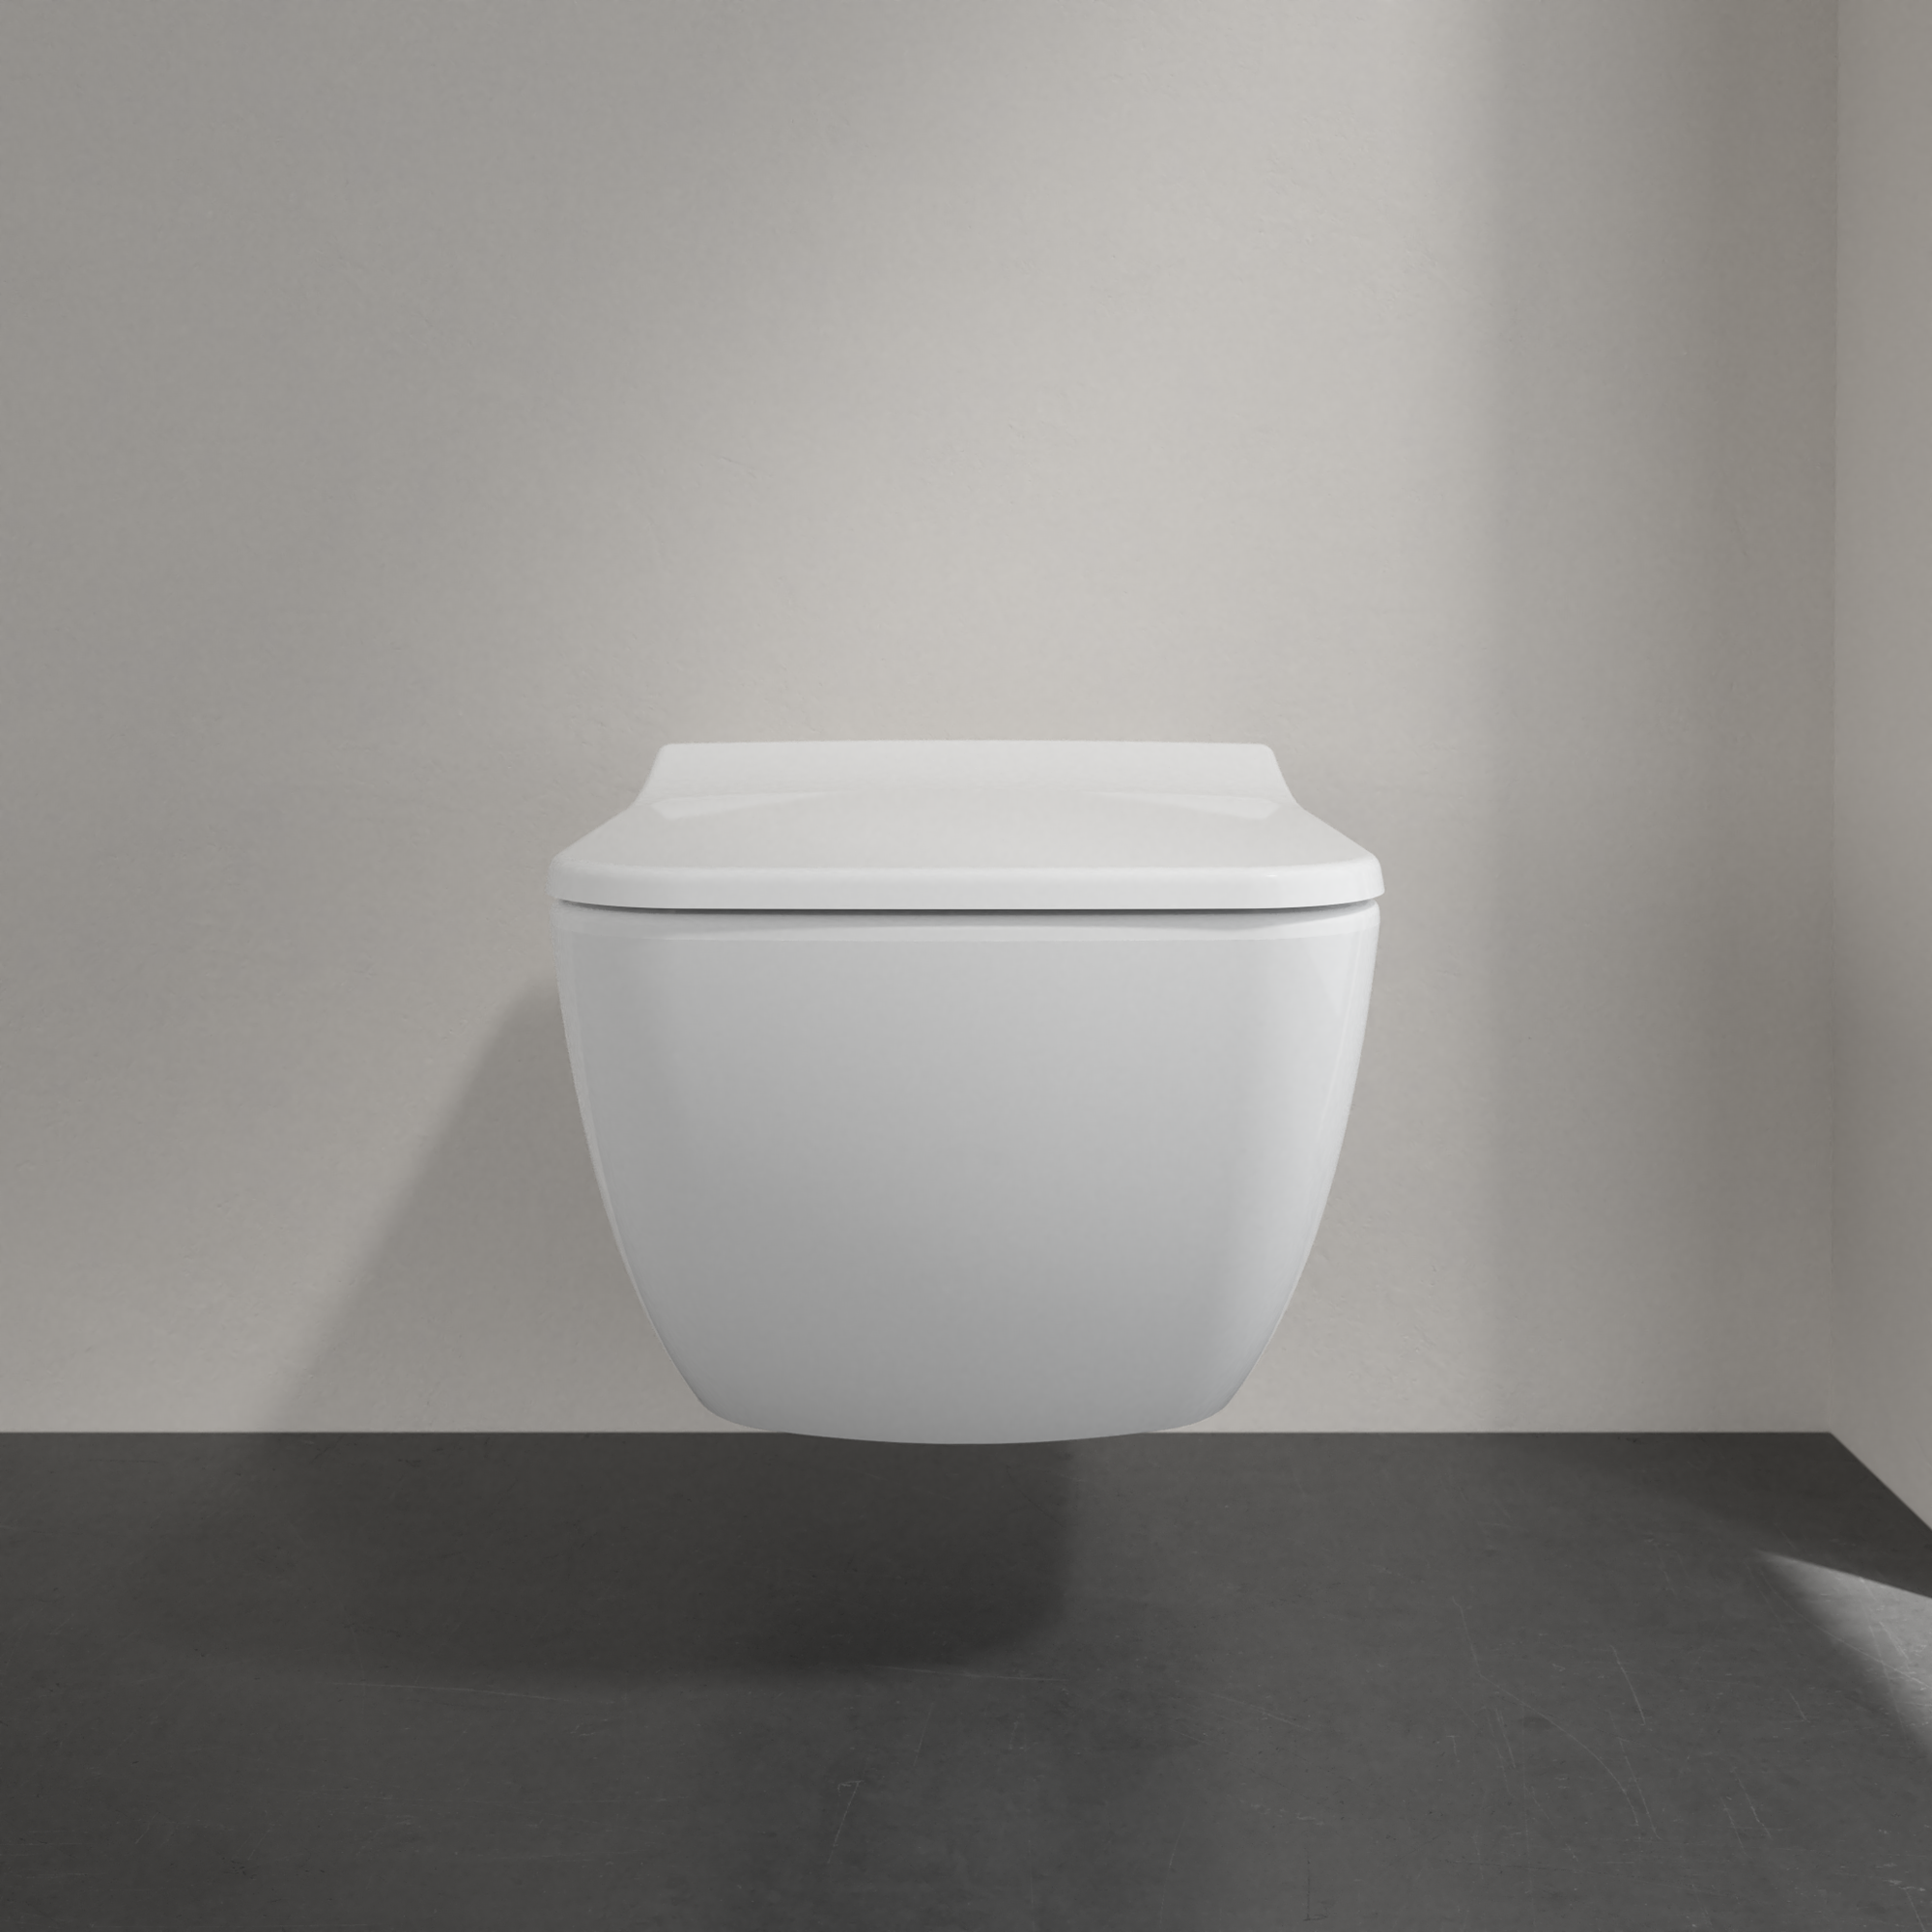 Wand-WC-Set Villeroy & Boch 'Venticello'  inkl. WC-Sitz + product picture